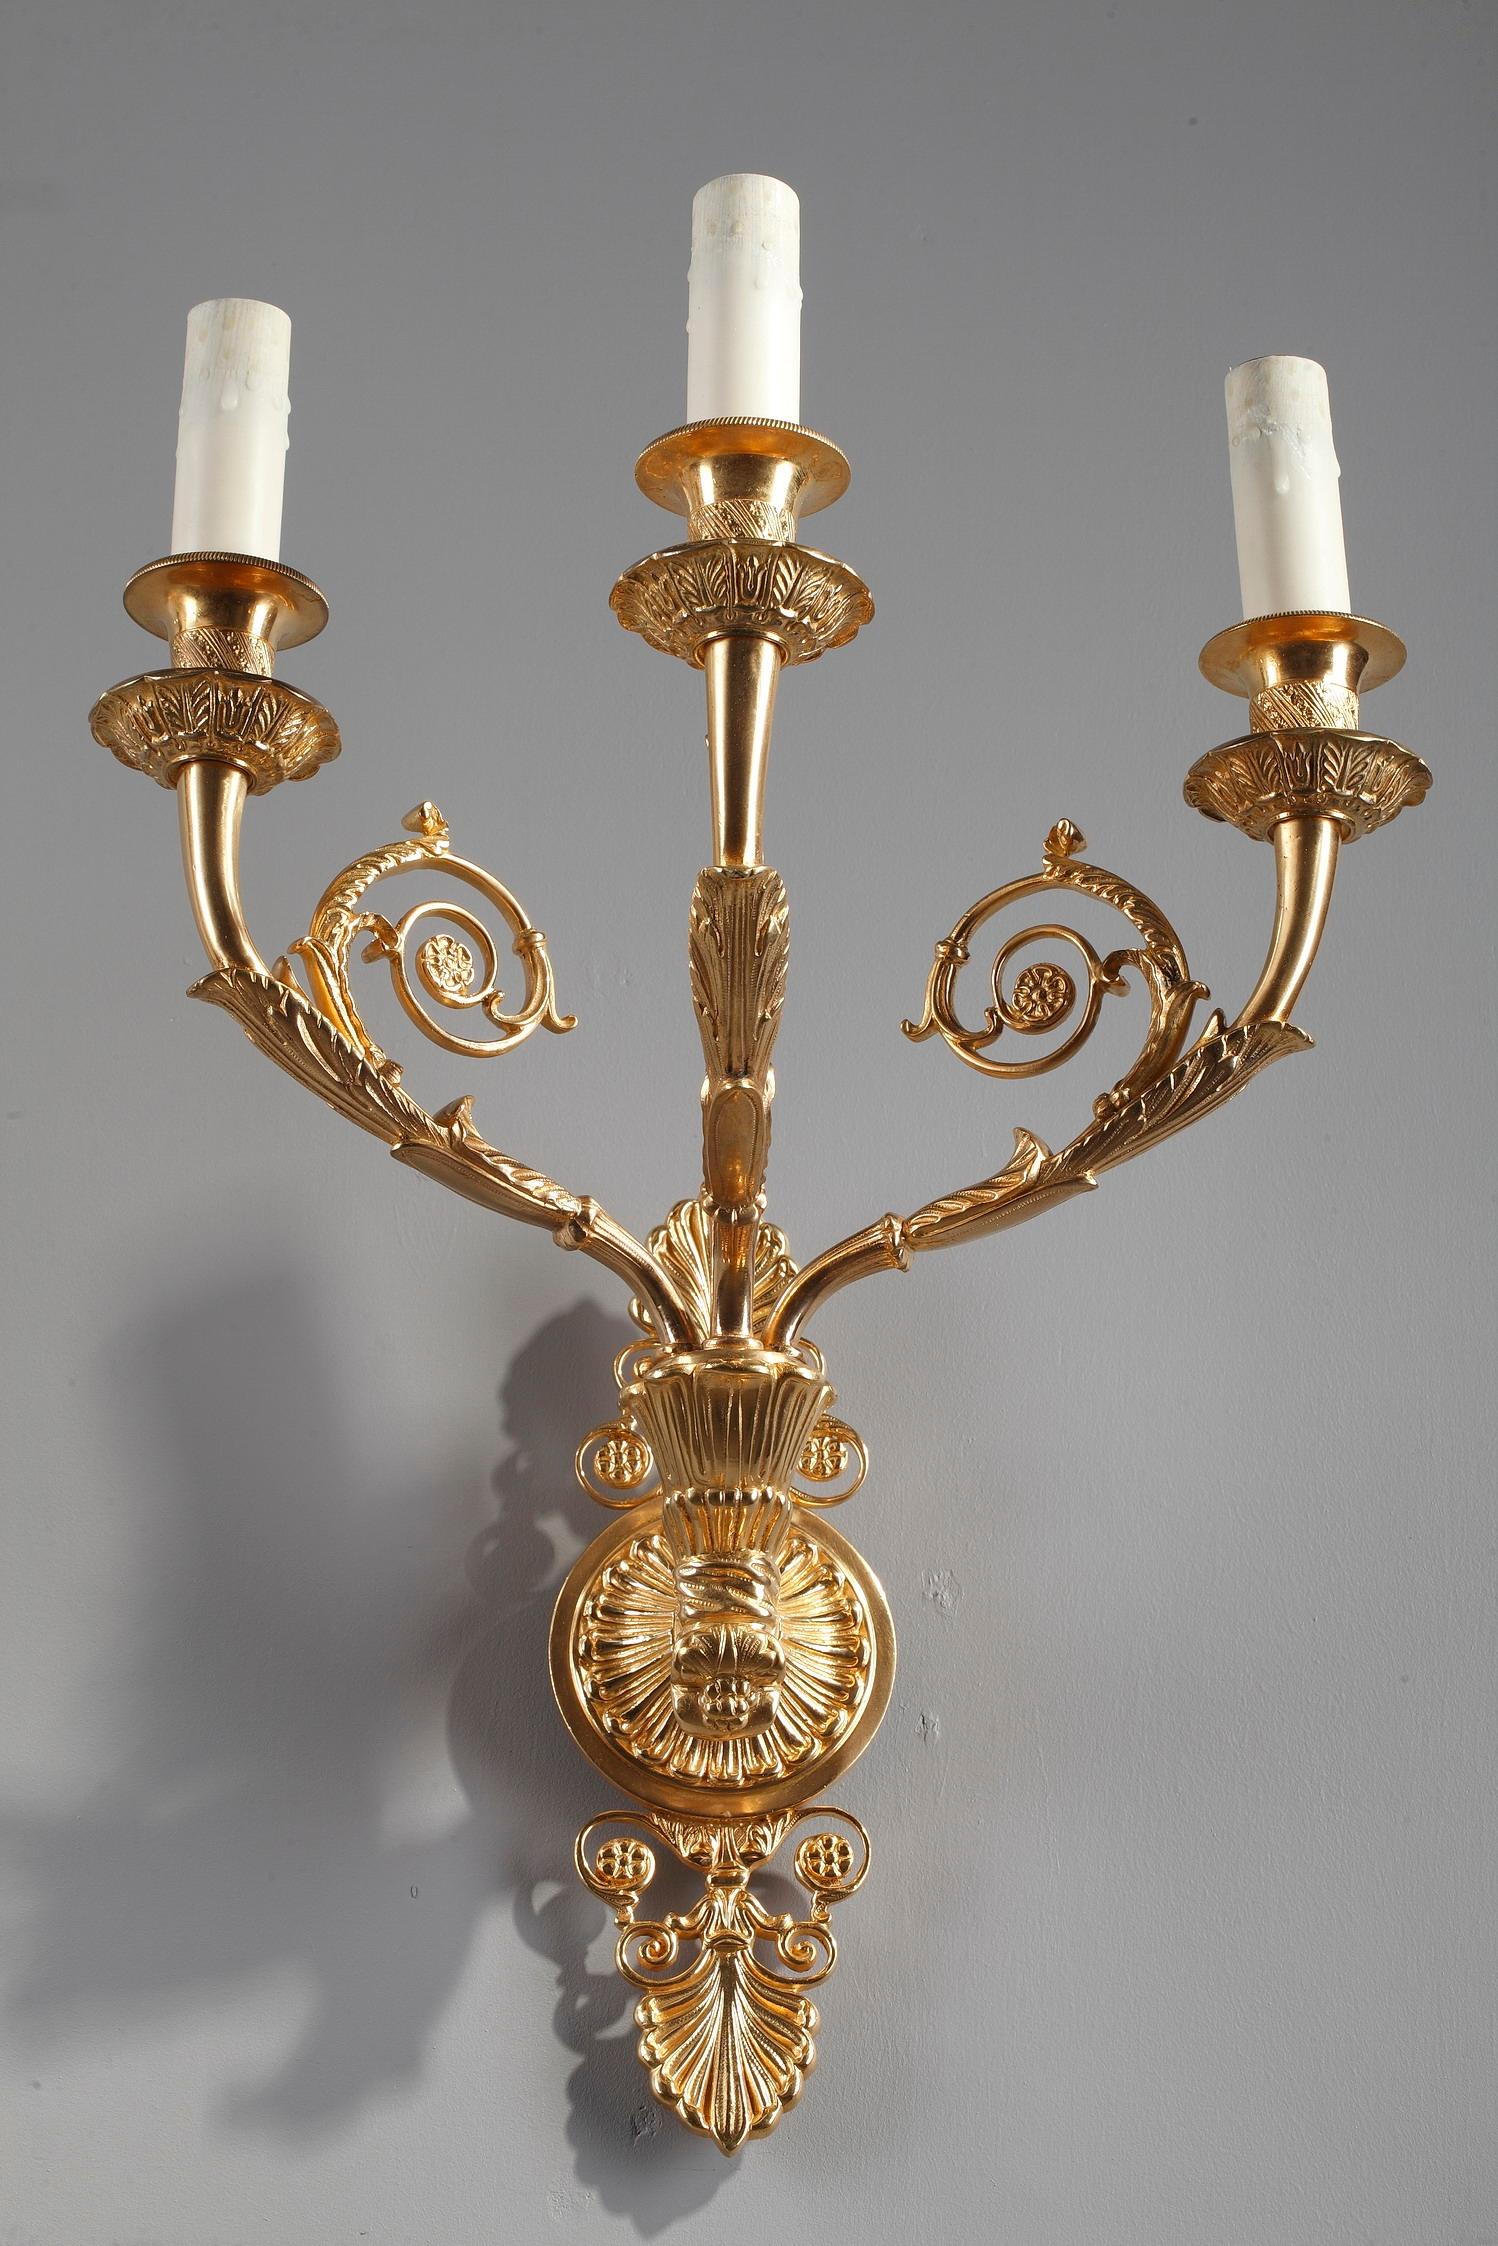 Pair of Ormolu wall sconces with three lights centered on a medallion. They are decorated with Charles X motifs: palmette, acanthus leaves, small flowers and scrolls. The upper and lower parts of the lamps are pierced. The lights are finely chiseled